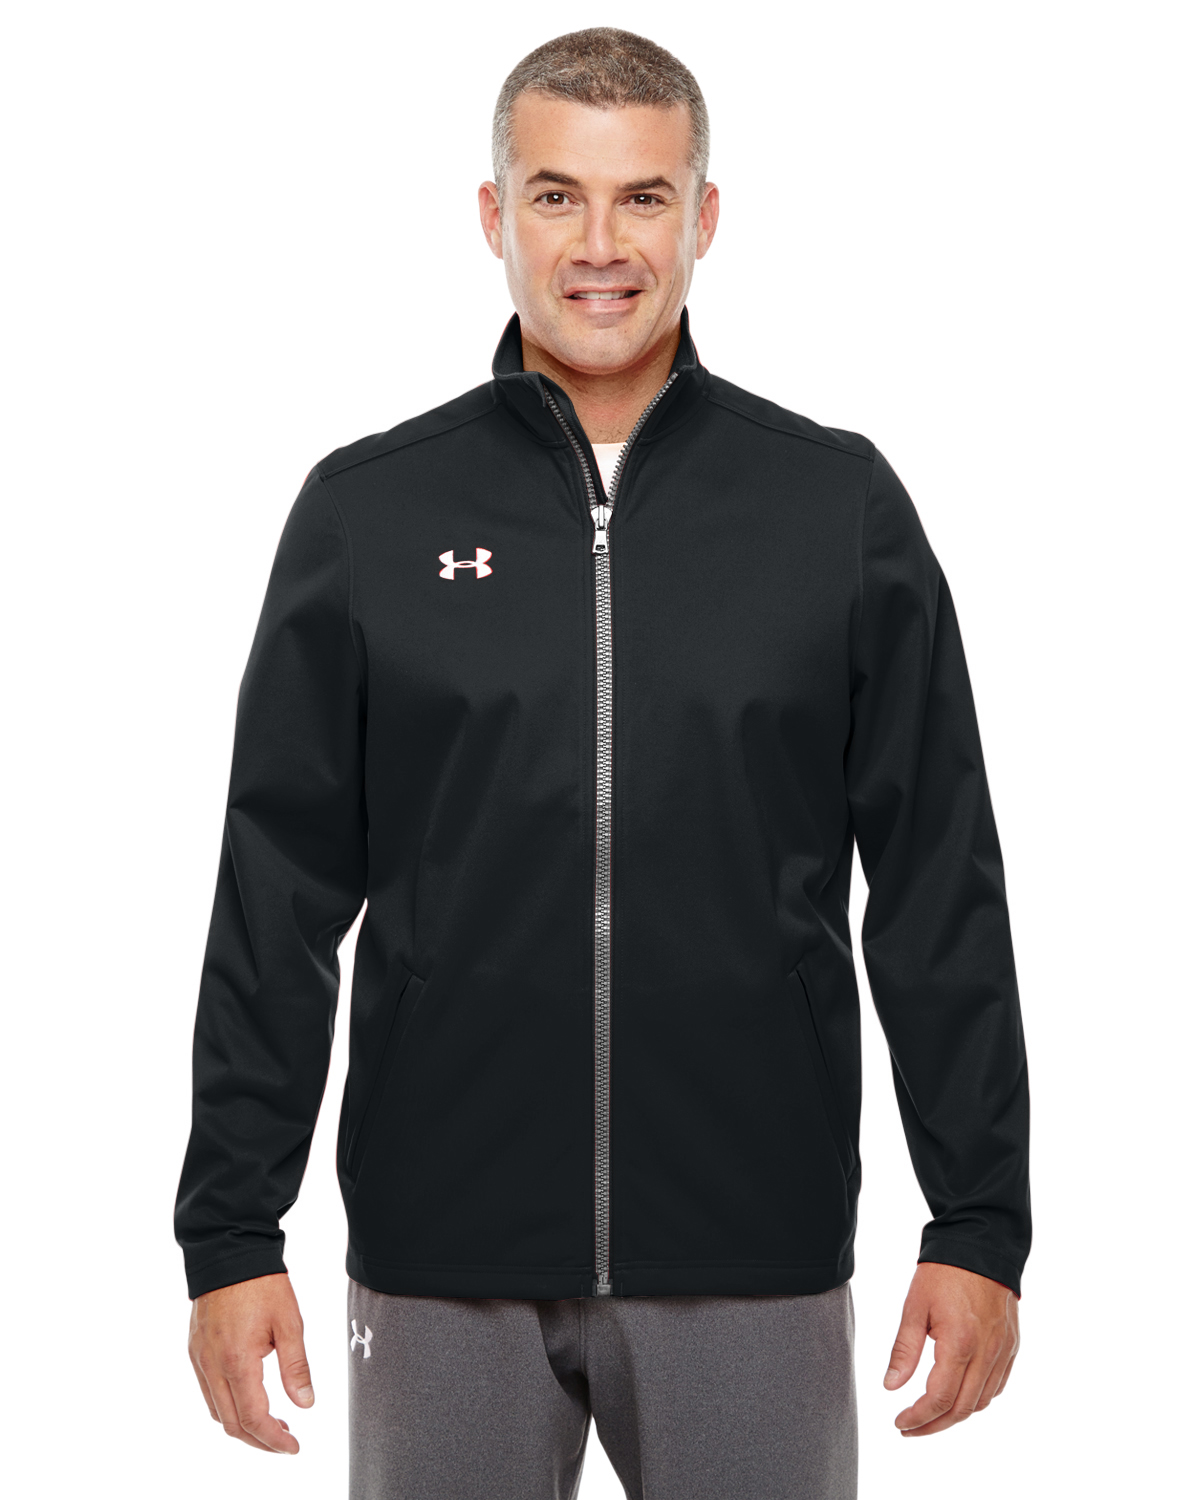 custom embroidered under armour jackets